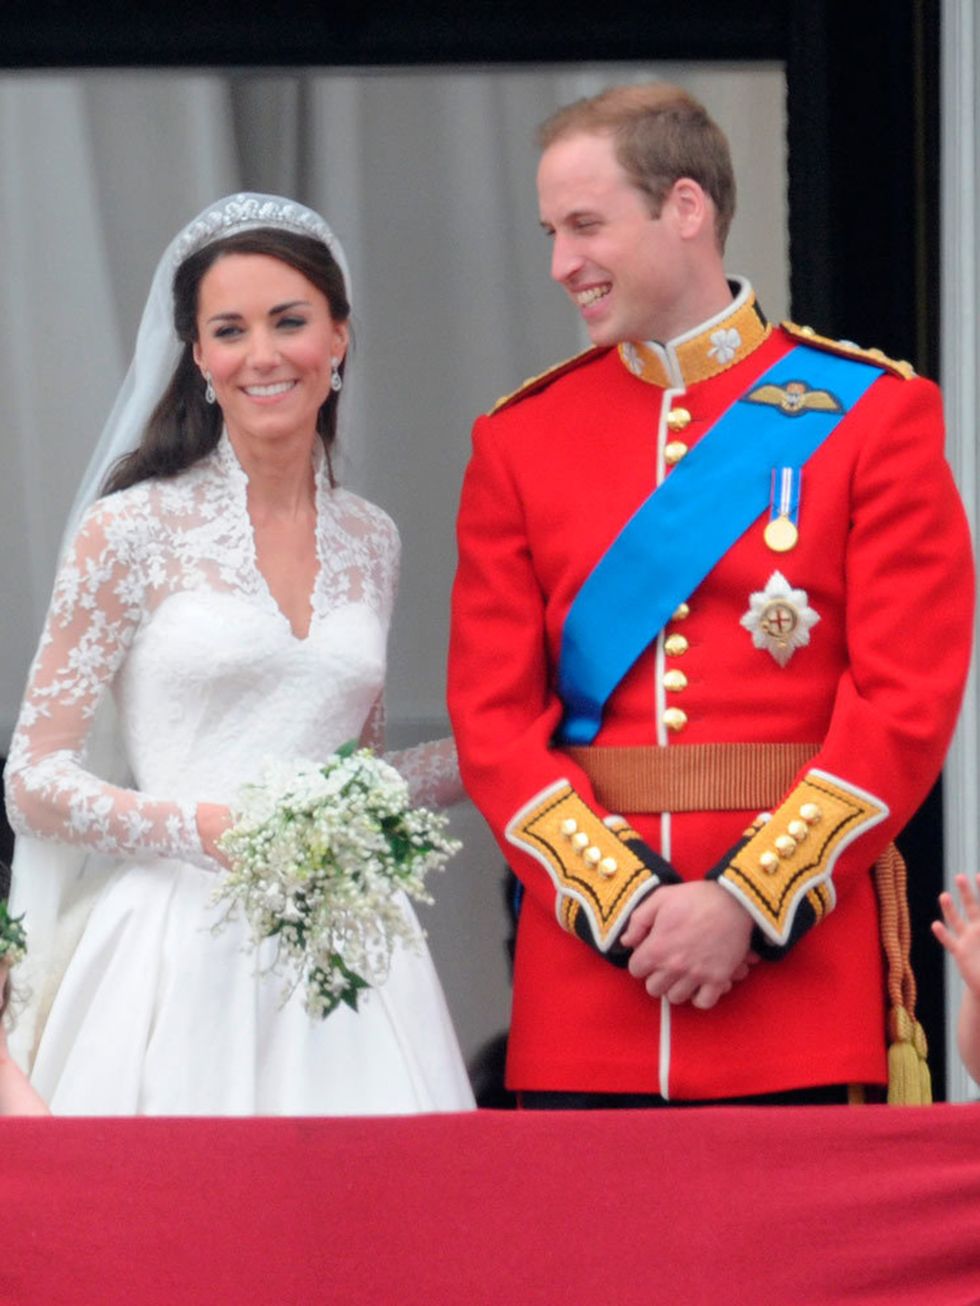 Prince William, in full military dress, wed Kate Middleton in April 2011.